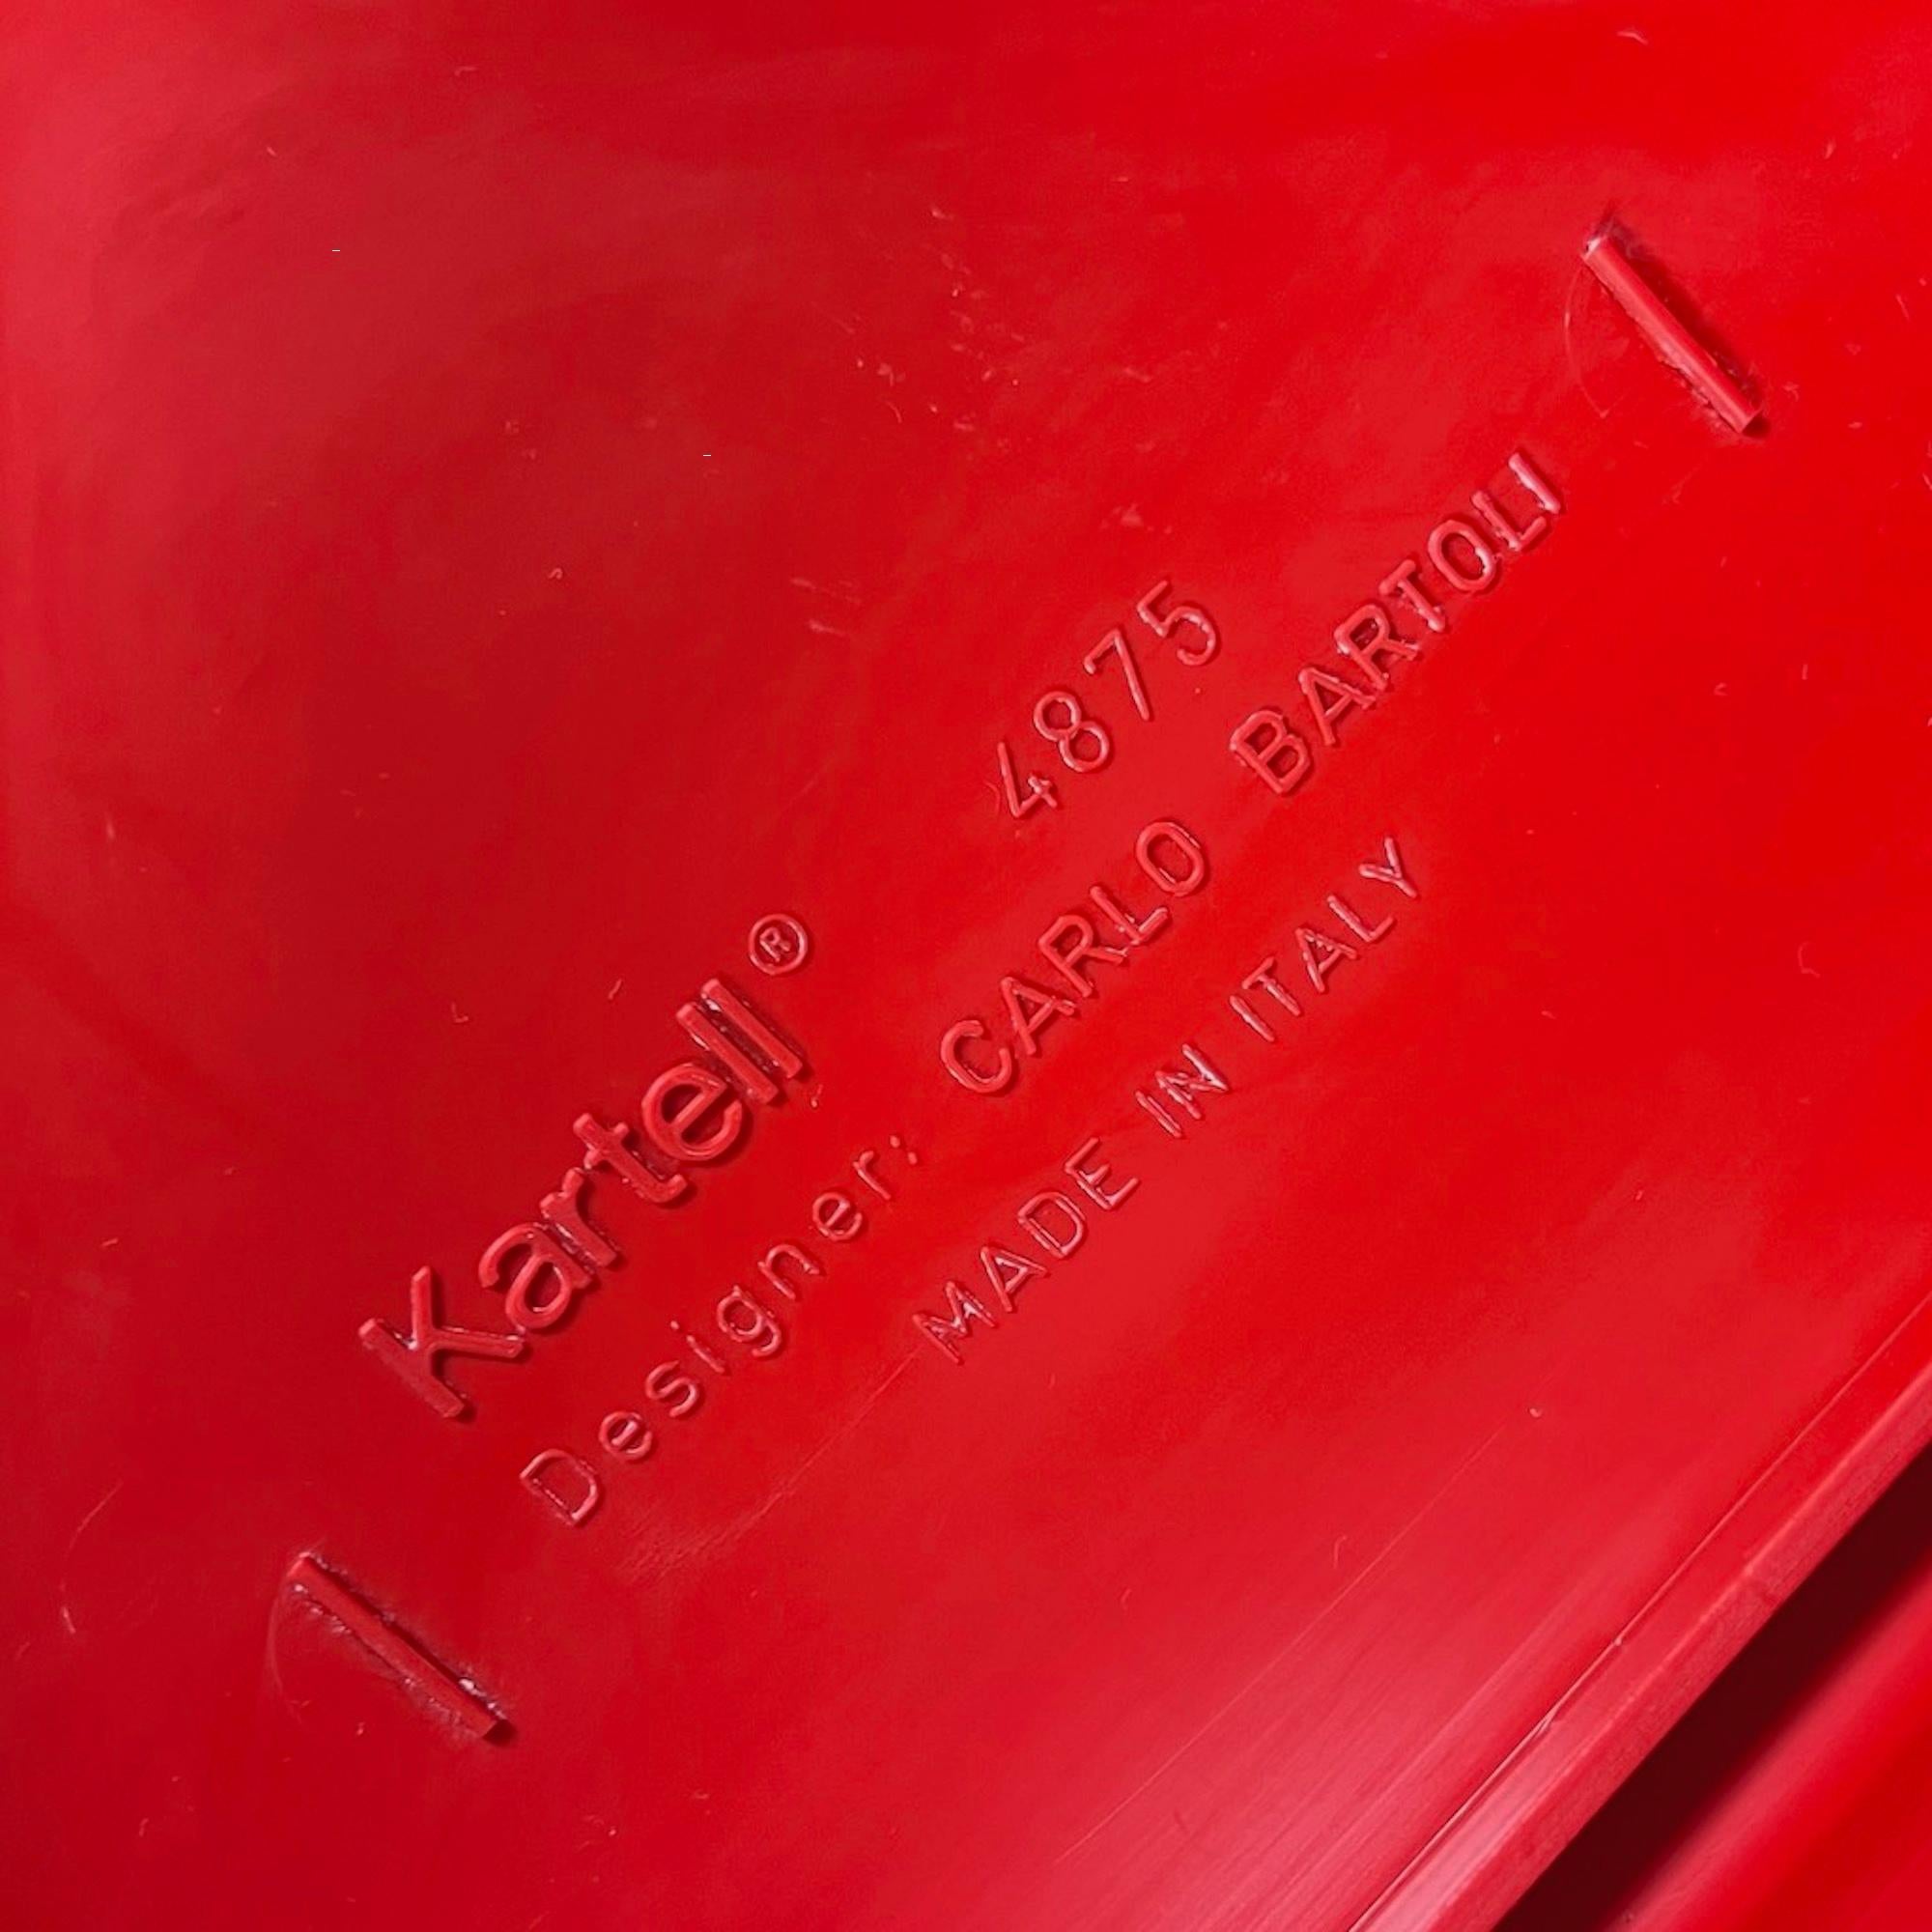 Kartell 4875 Chair by Carlo Bartoli in Glossy Red, 1980s Edition For Sale 1